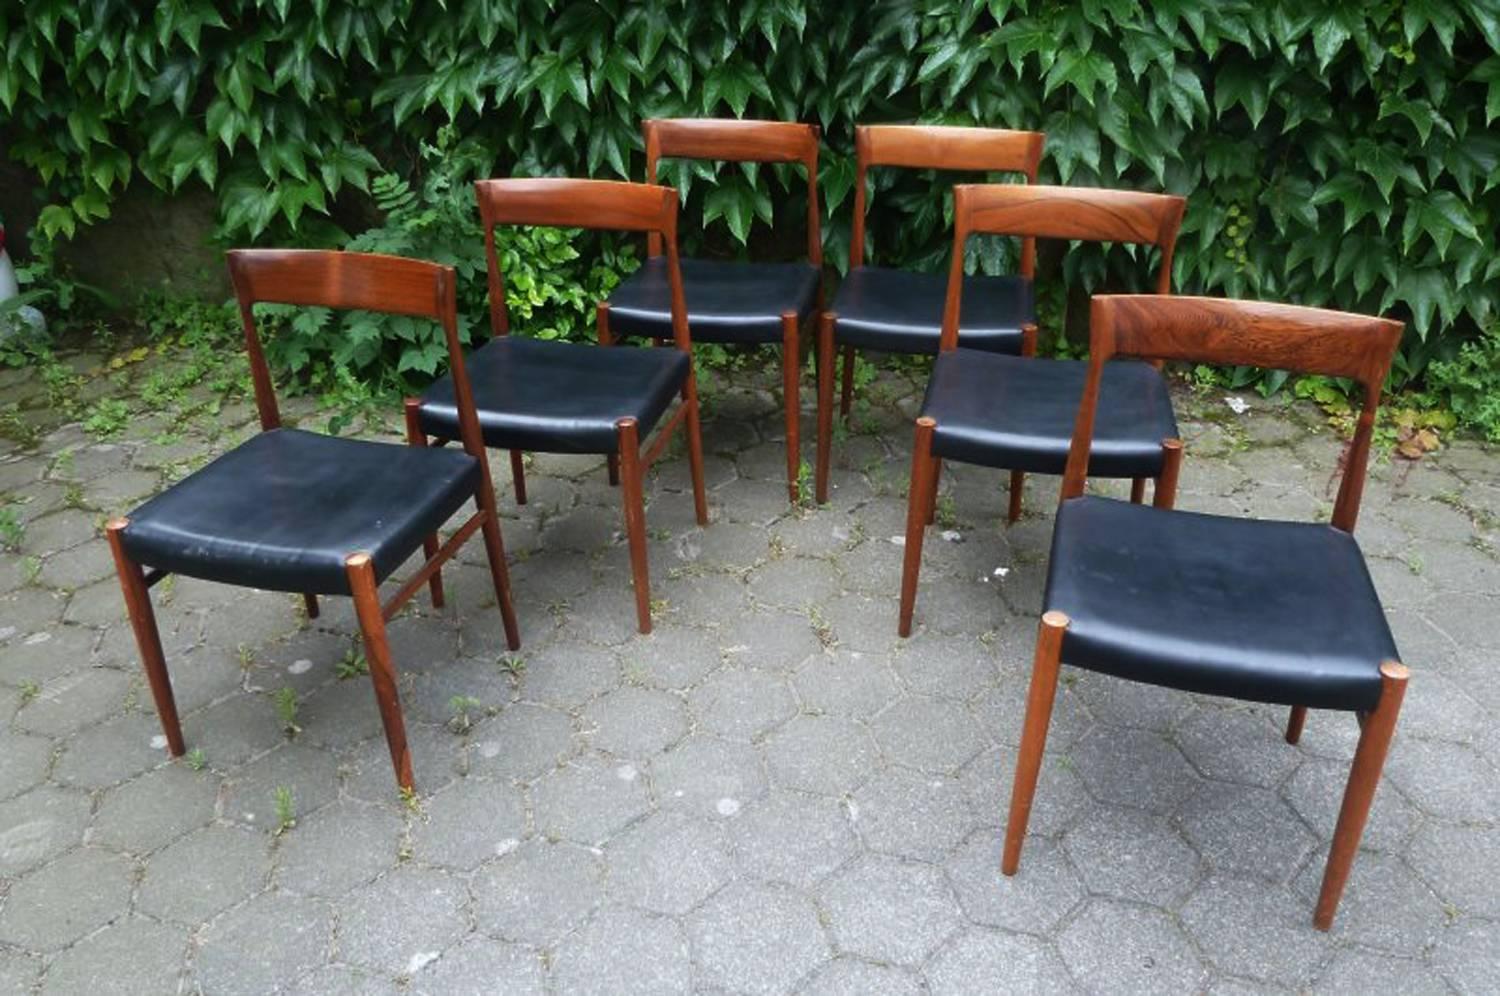 Mid-20th Century Set of Six Hardwood Dining Chairs in the Style of Møller 77 Chairs For Sale